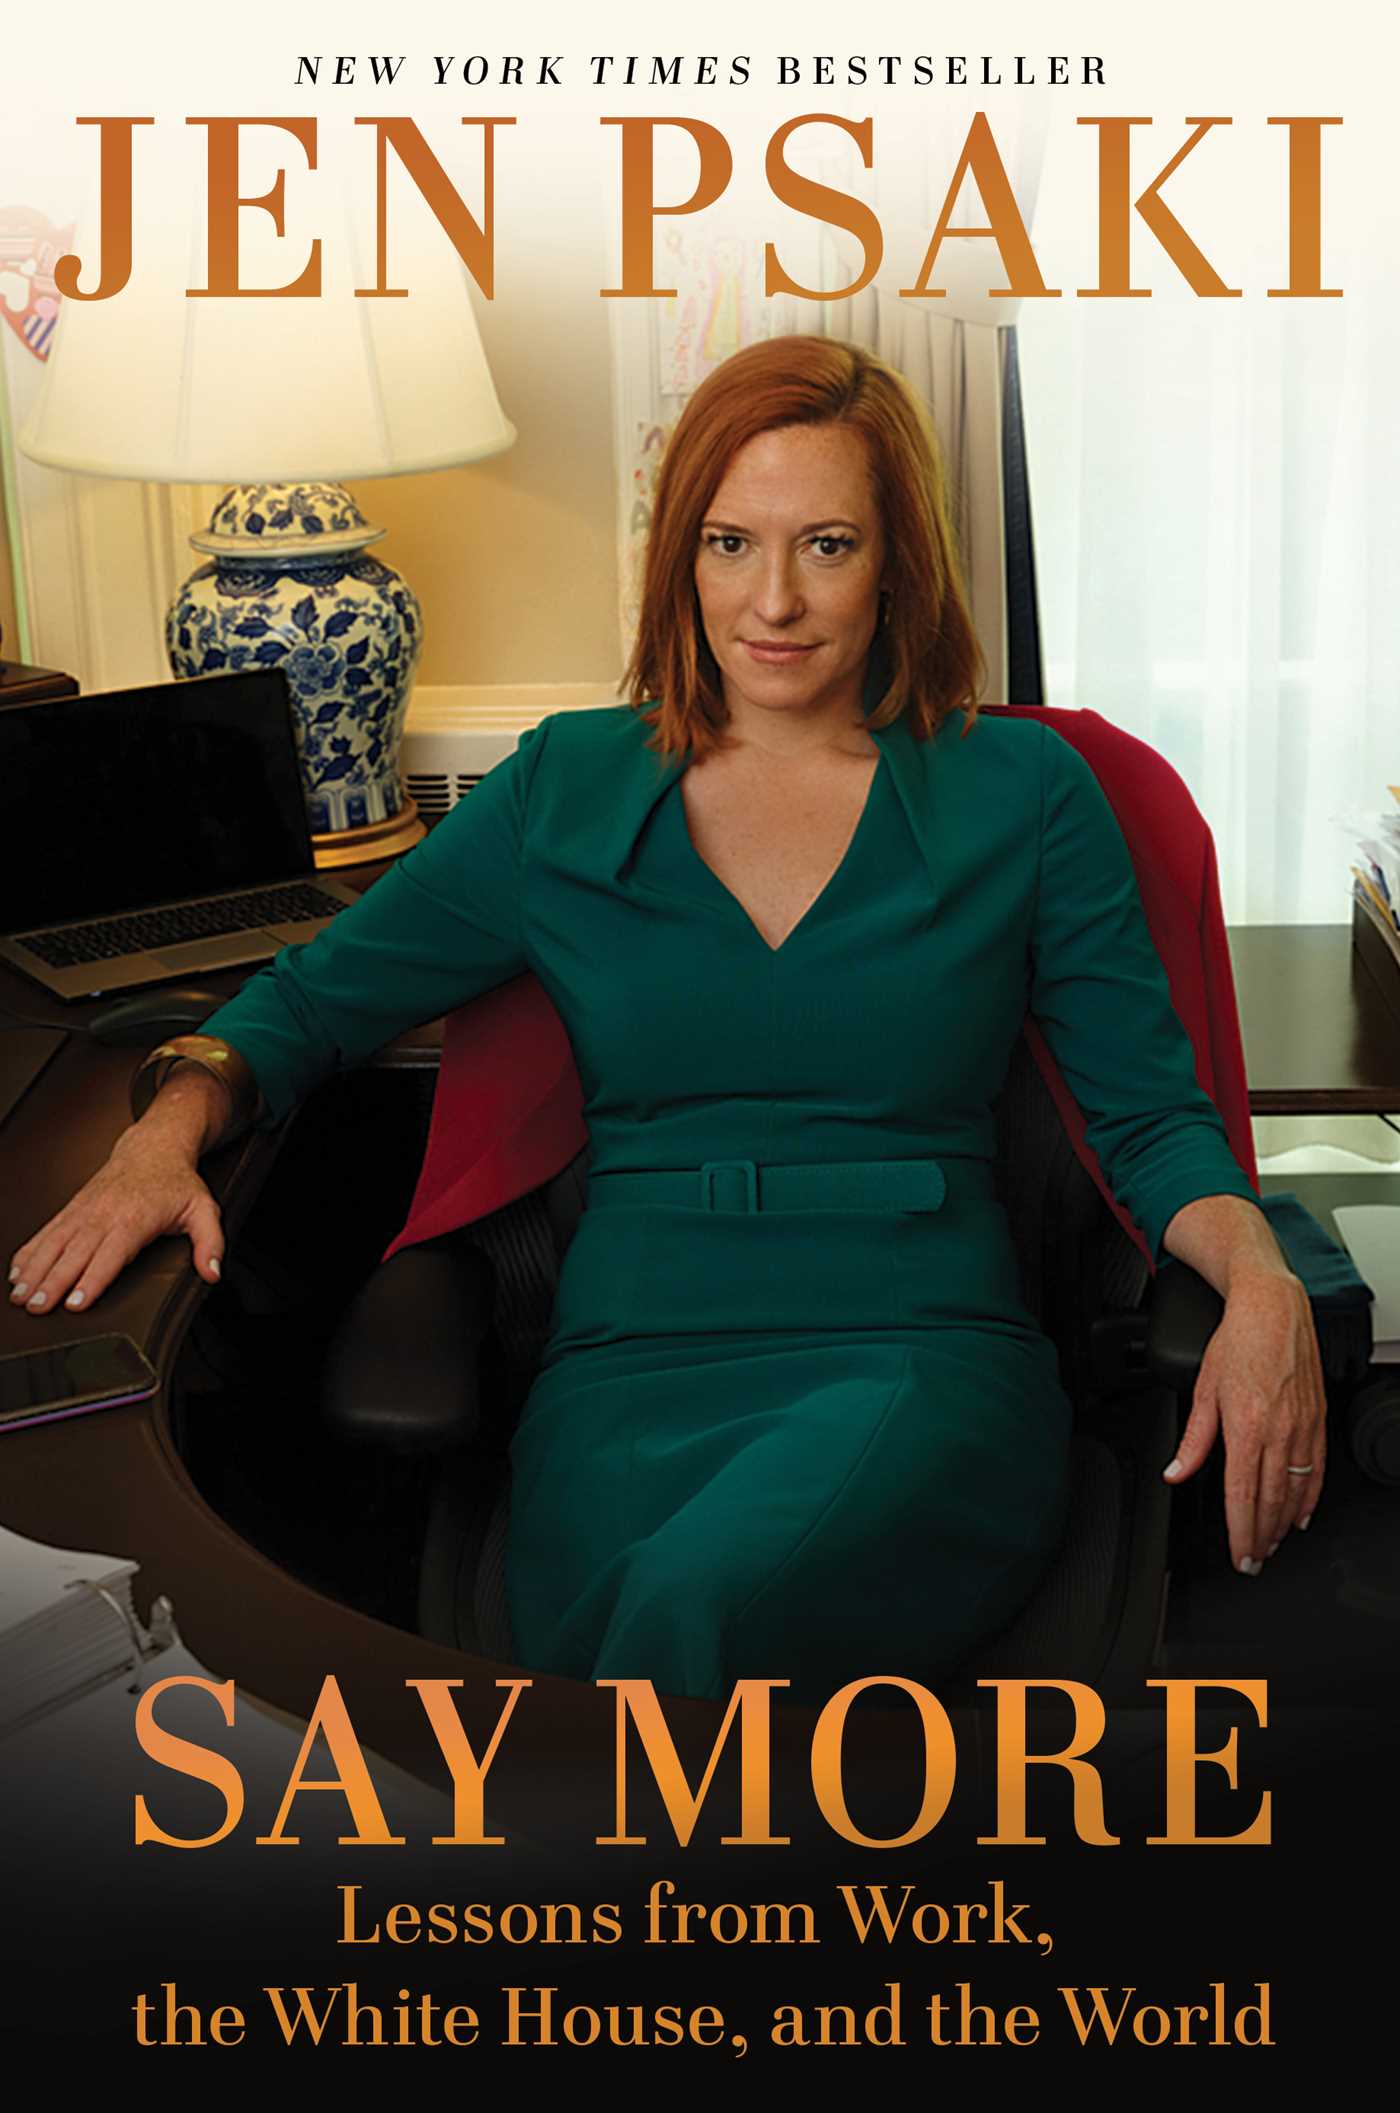 Image for "Say More"